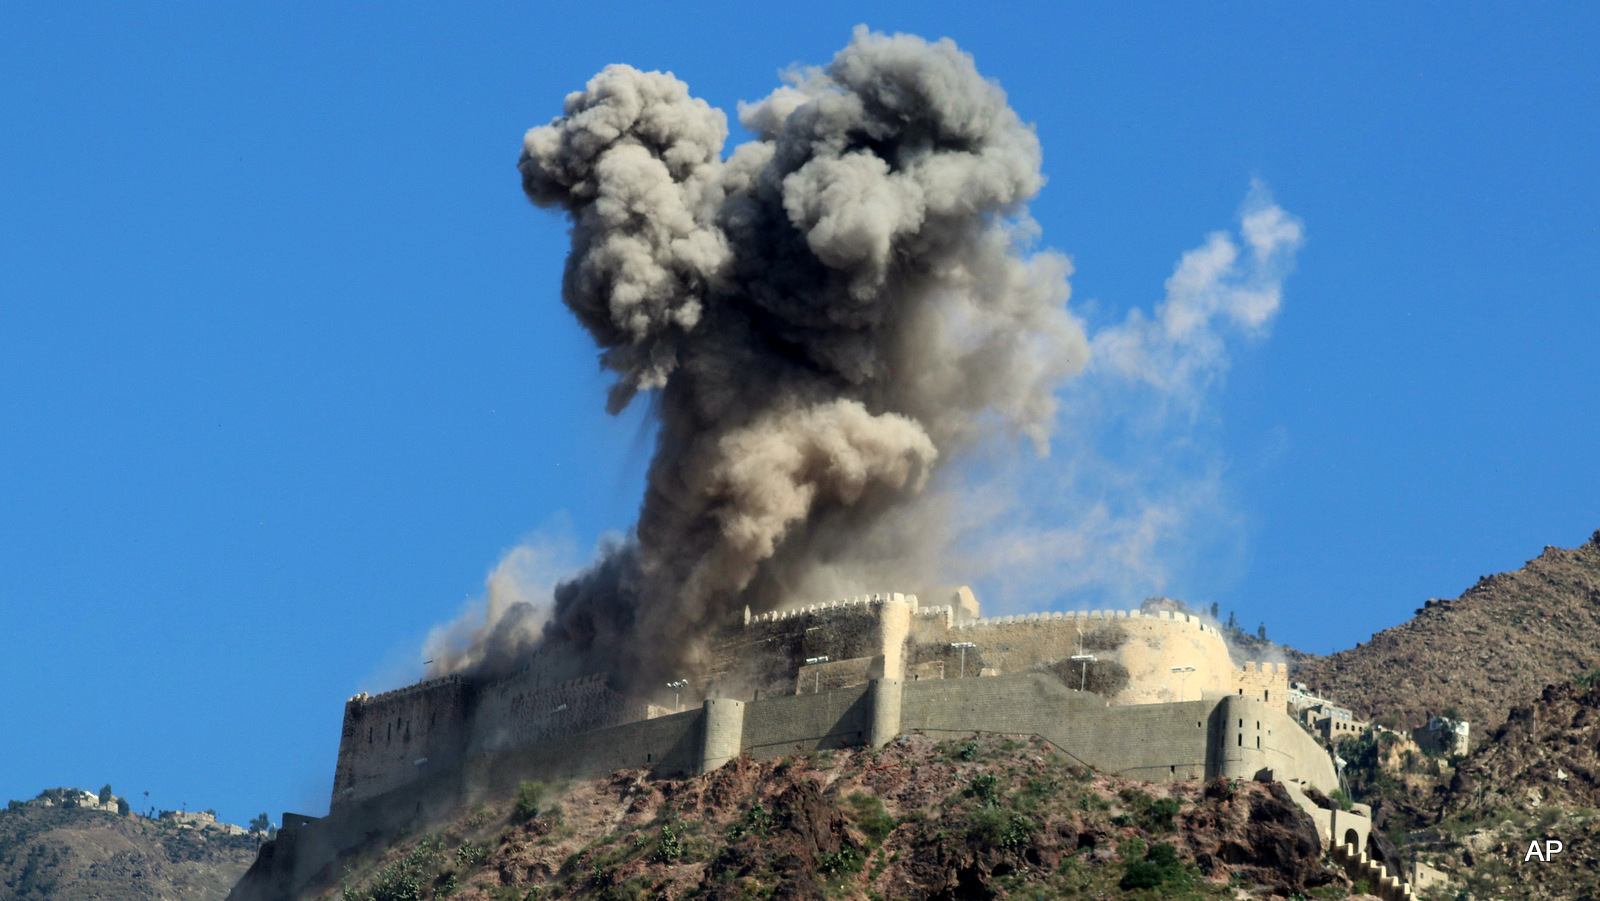 Smoke rises from Al-Qahira castle following a Saudi-led airstrike in Taiz city, Yemen, Tuesday, May 12, 2015. Warplanes from a Saudi-led coalition kept up their airstrikes in Yemen on Tuesday, targeting the positions of Shiite rebels and their allies just hours ahead of the scheduled start of a five-day humanitarian cease-